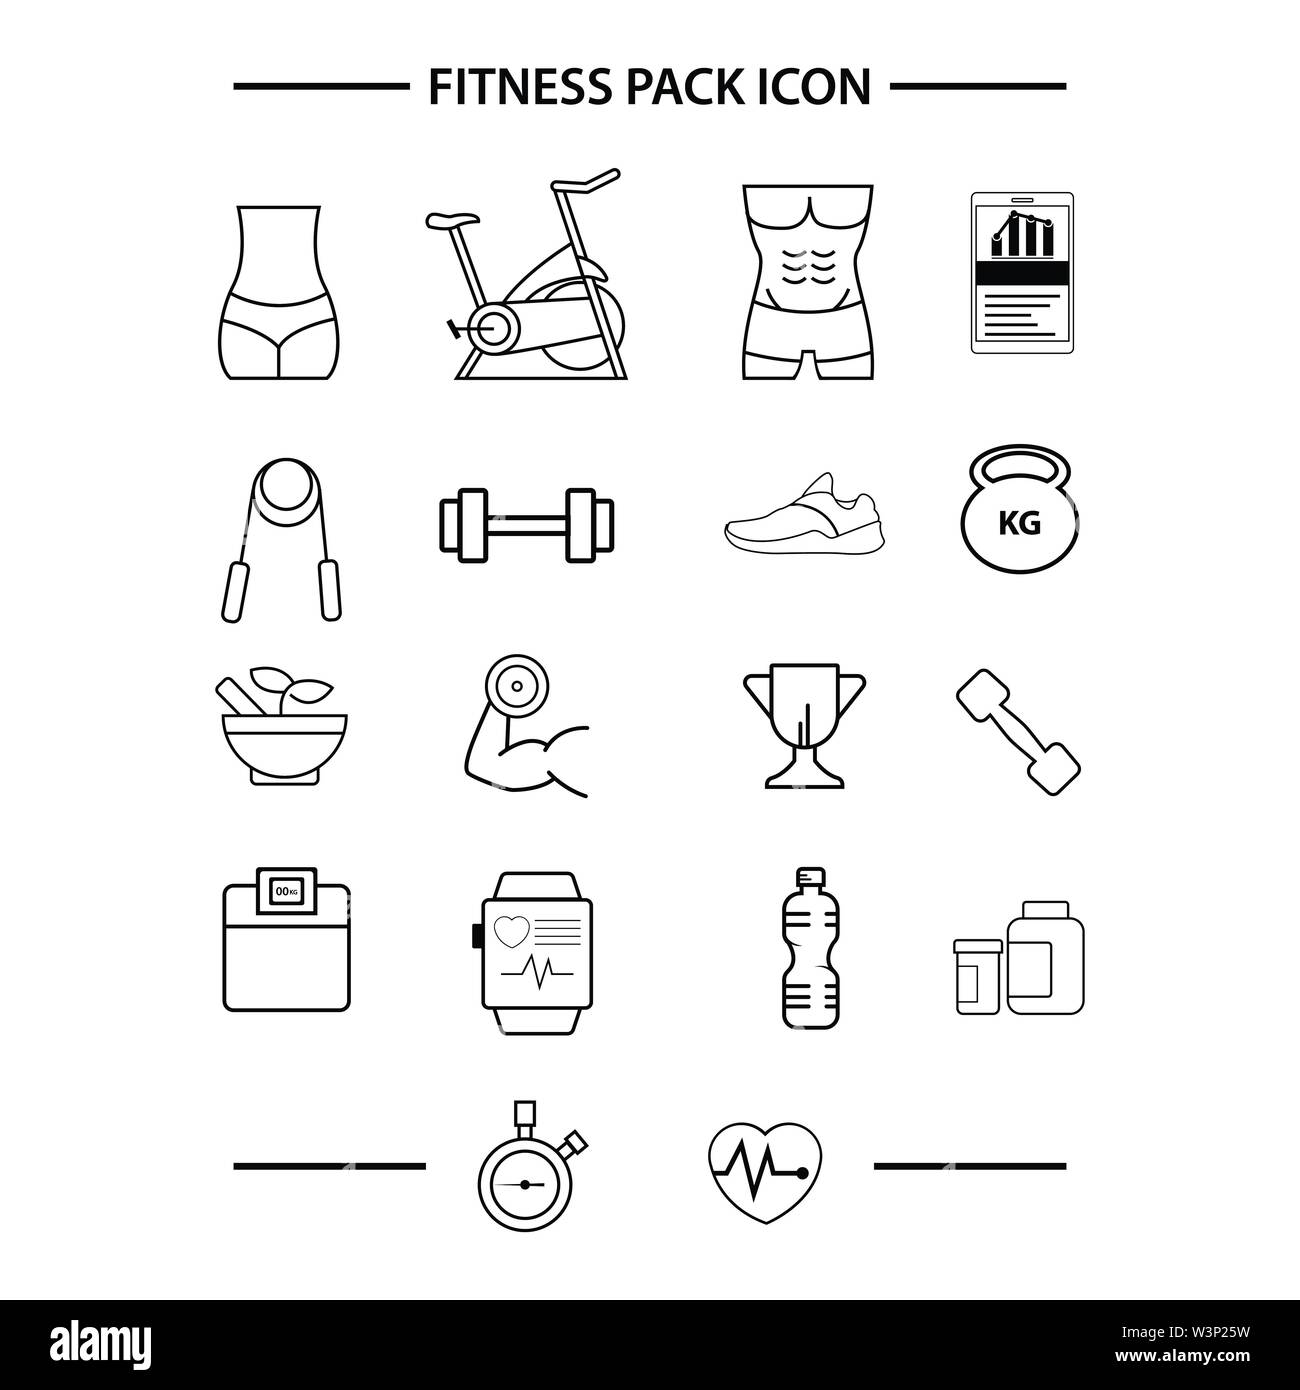 Gym Logo Design Vector Hd Images, Letter Pm Vector Logo Design Gym Icon  Stock, Logo Icons, Icons Stock, Gym Icons PNG Image For Free Download